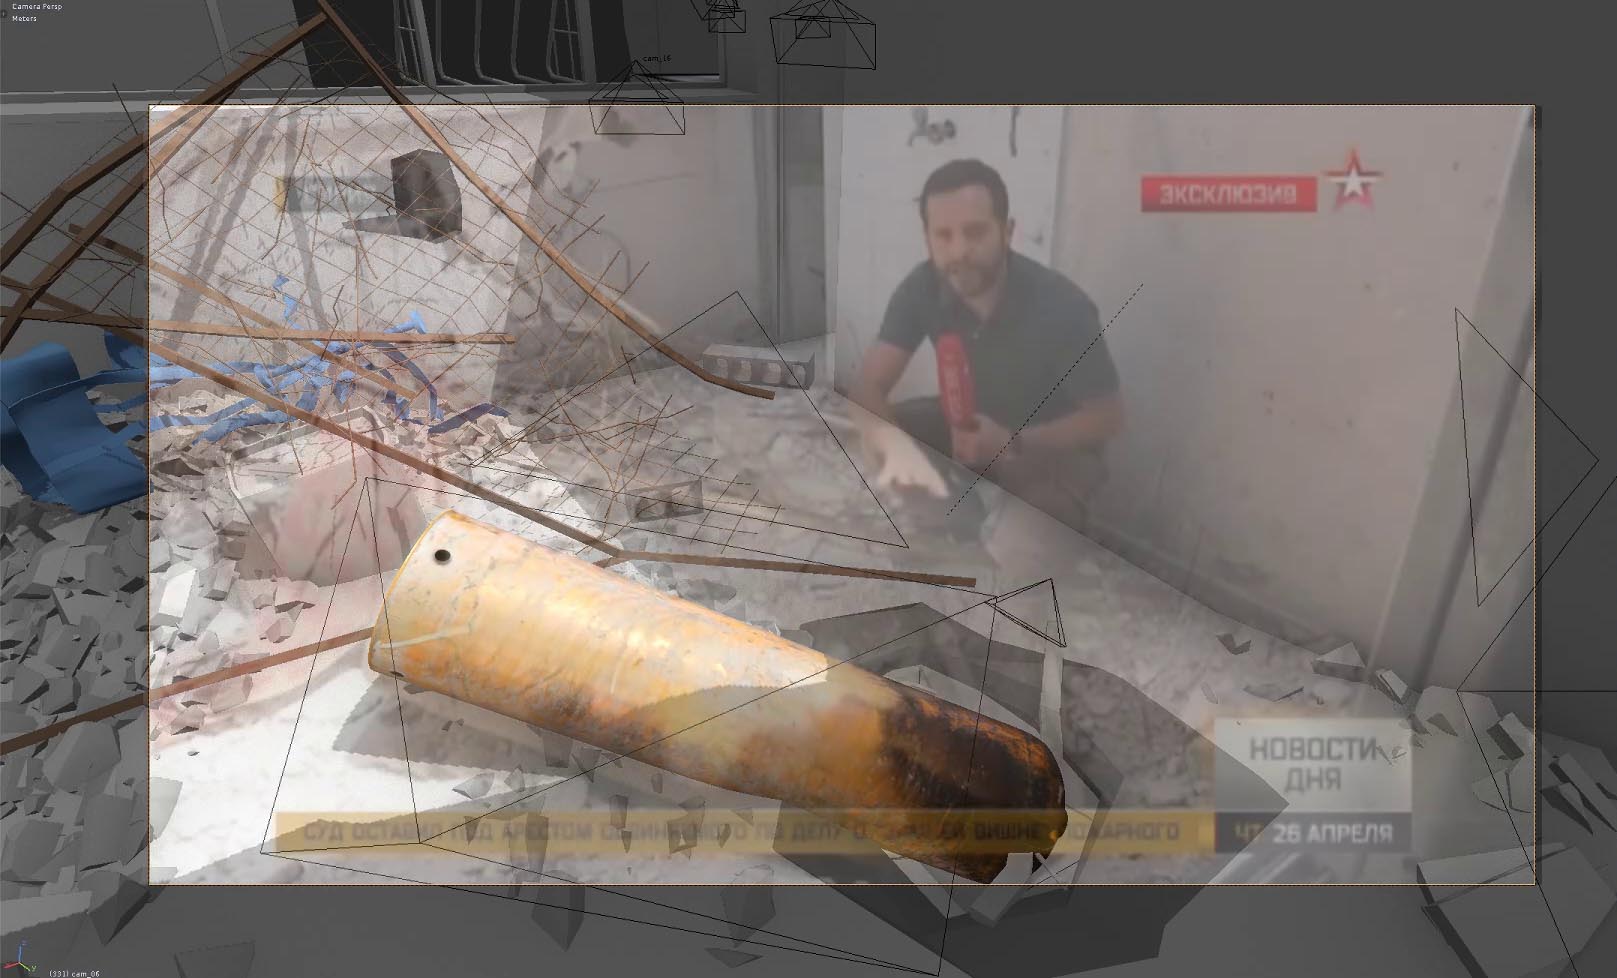 Forensic Architecture's reconstruction of a 2018 attack in Douma, Syria, based on a Russian TV report, showed that the canister came in a harness (in blue) made for aerial ammunition. When it was dropped, the canister tore through a wired fence (in brown) before discharging the chlorine gas, confirmed by the discoloration caused by corrosion near the nose. Image credit - Forensic Architecture